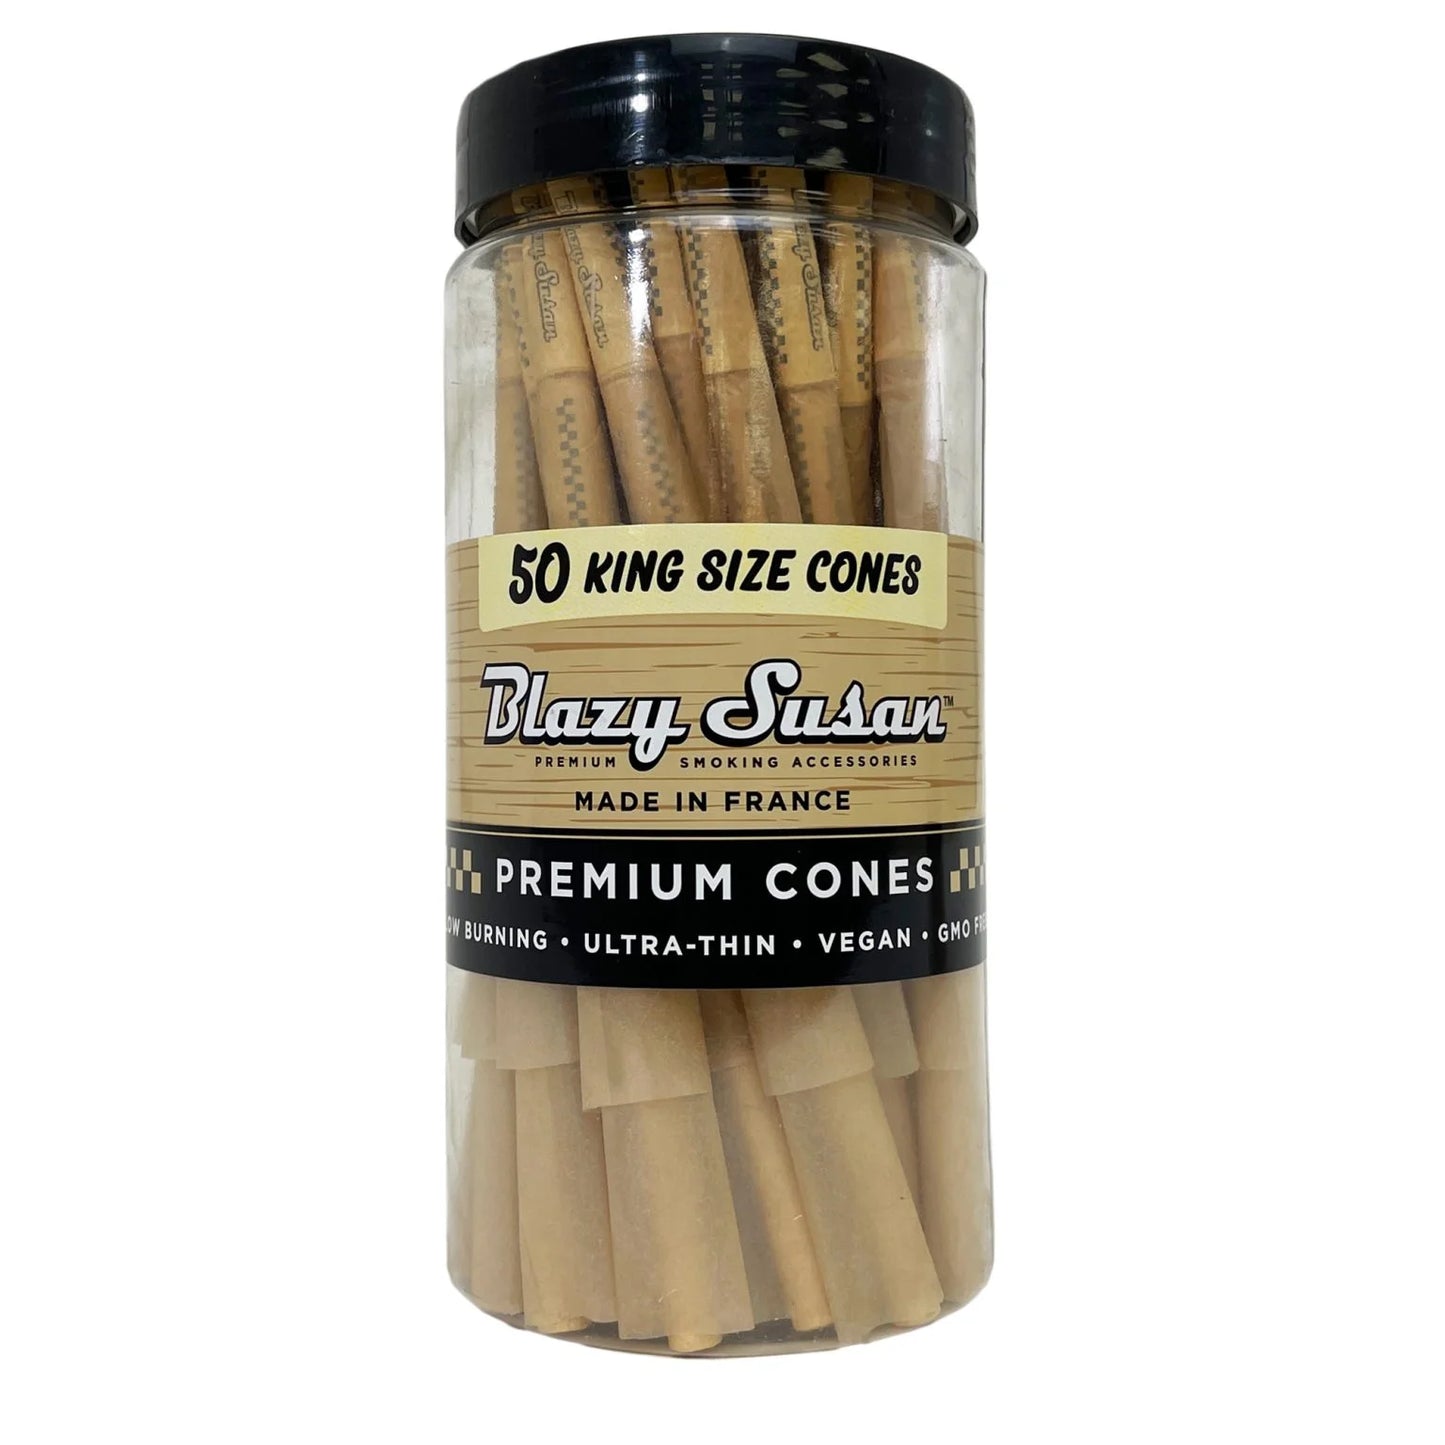 Blazy Susan Cones 50CT King Size UNBLEACHED